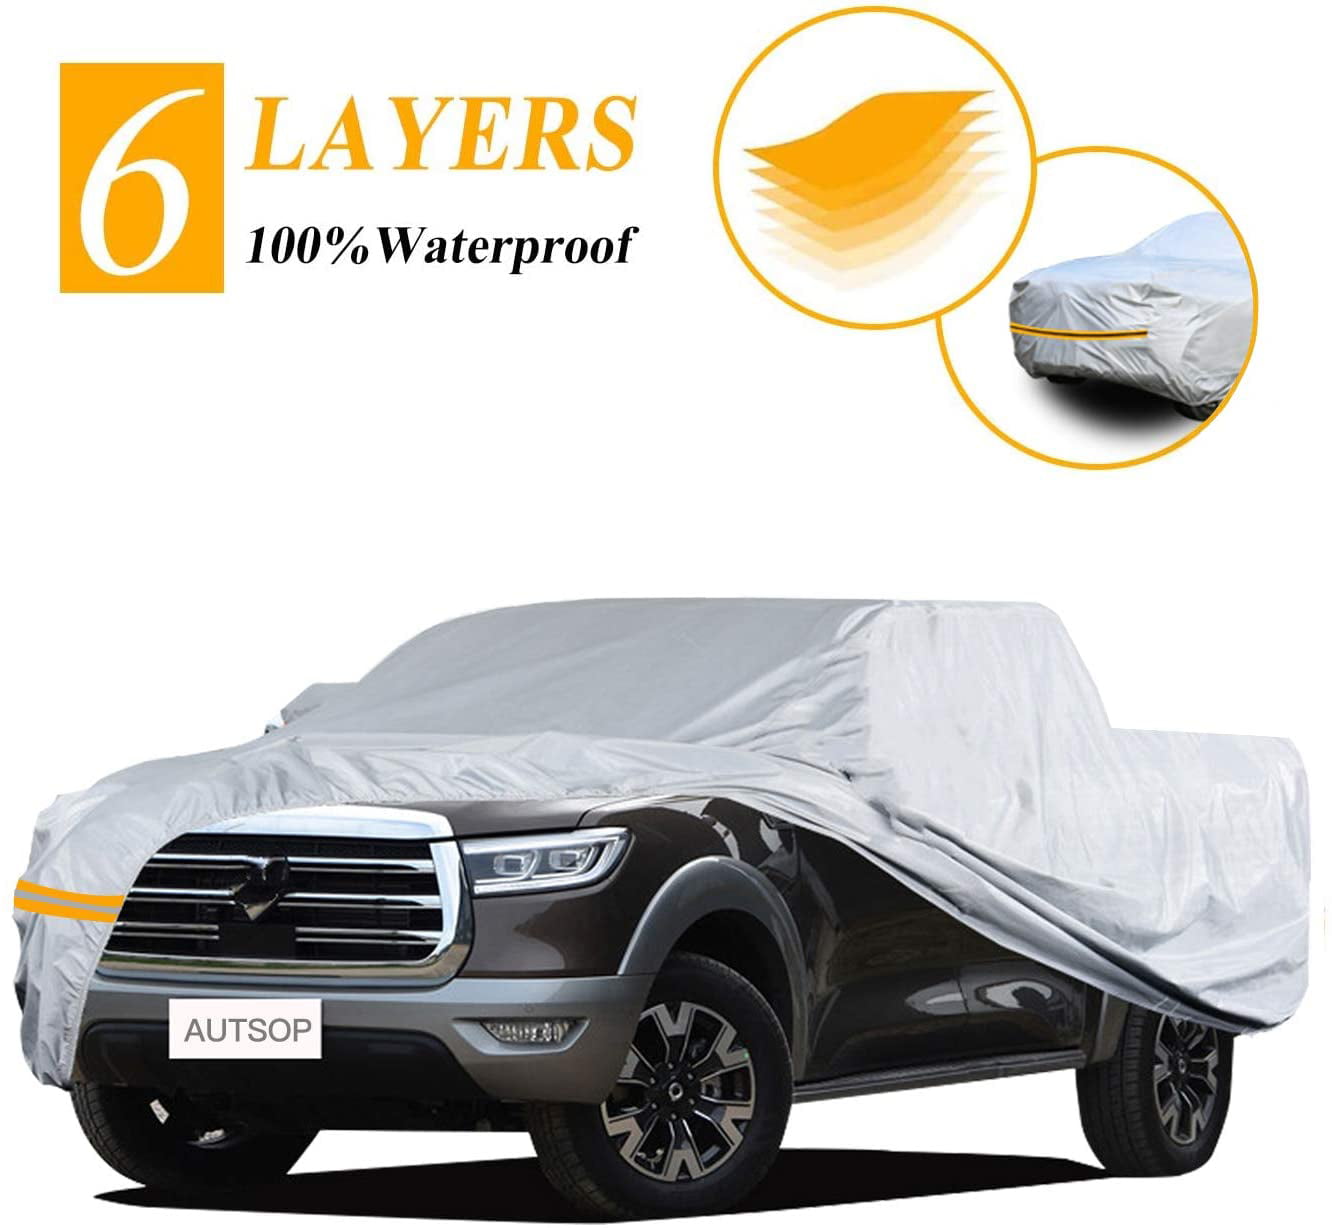 Car Cover Waterproof All Weather,6 Layers Outdoor Car Covers for